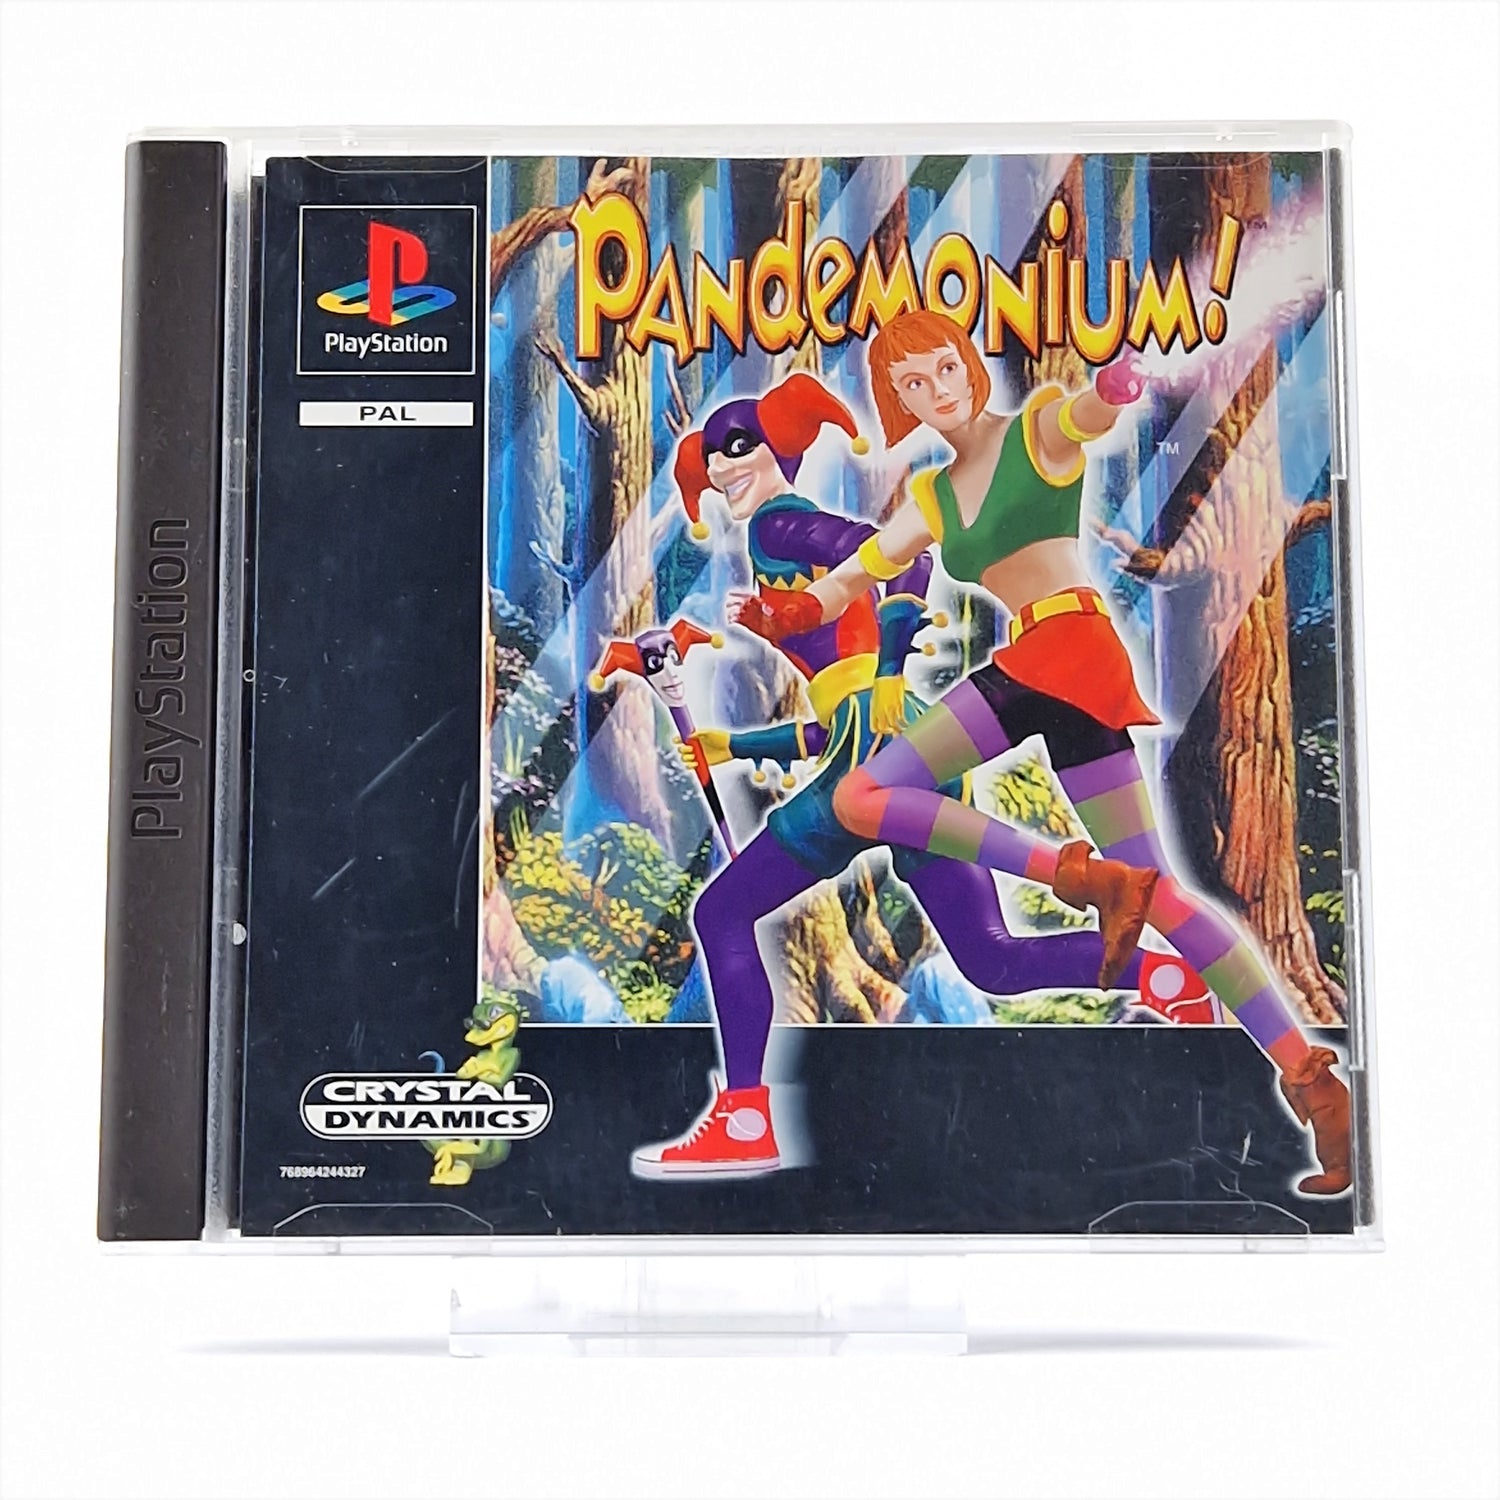 Sony Playstation 1 Spiel : Pandemonium ! - OVP Anleitung CD | PS1 PSX Game